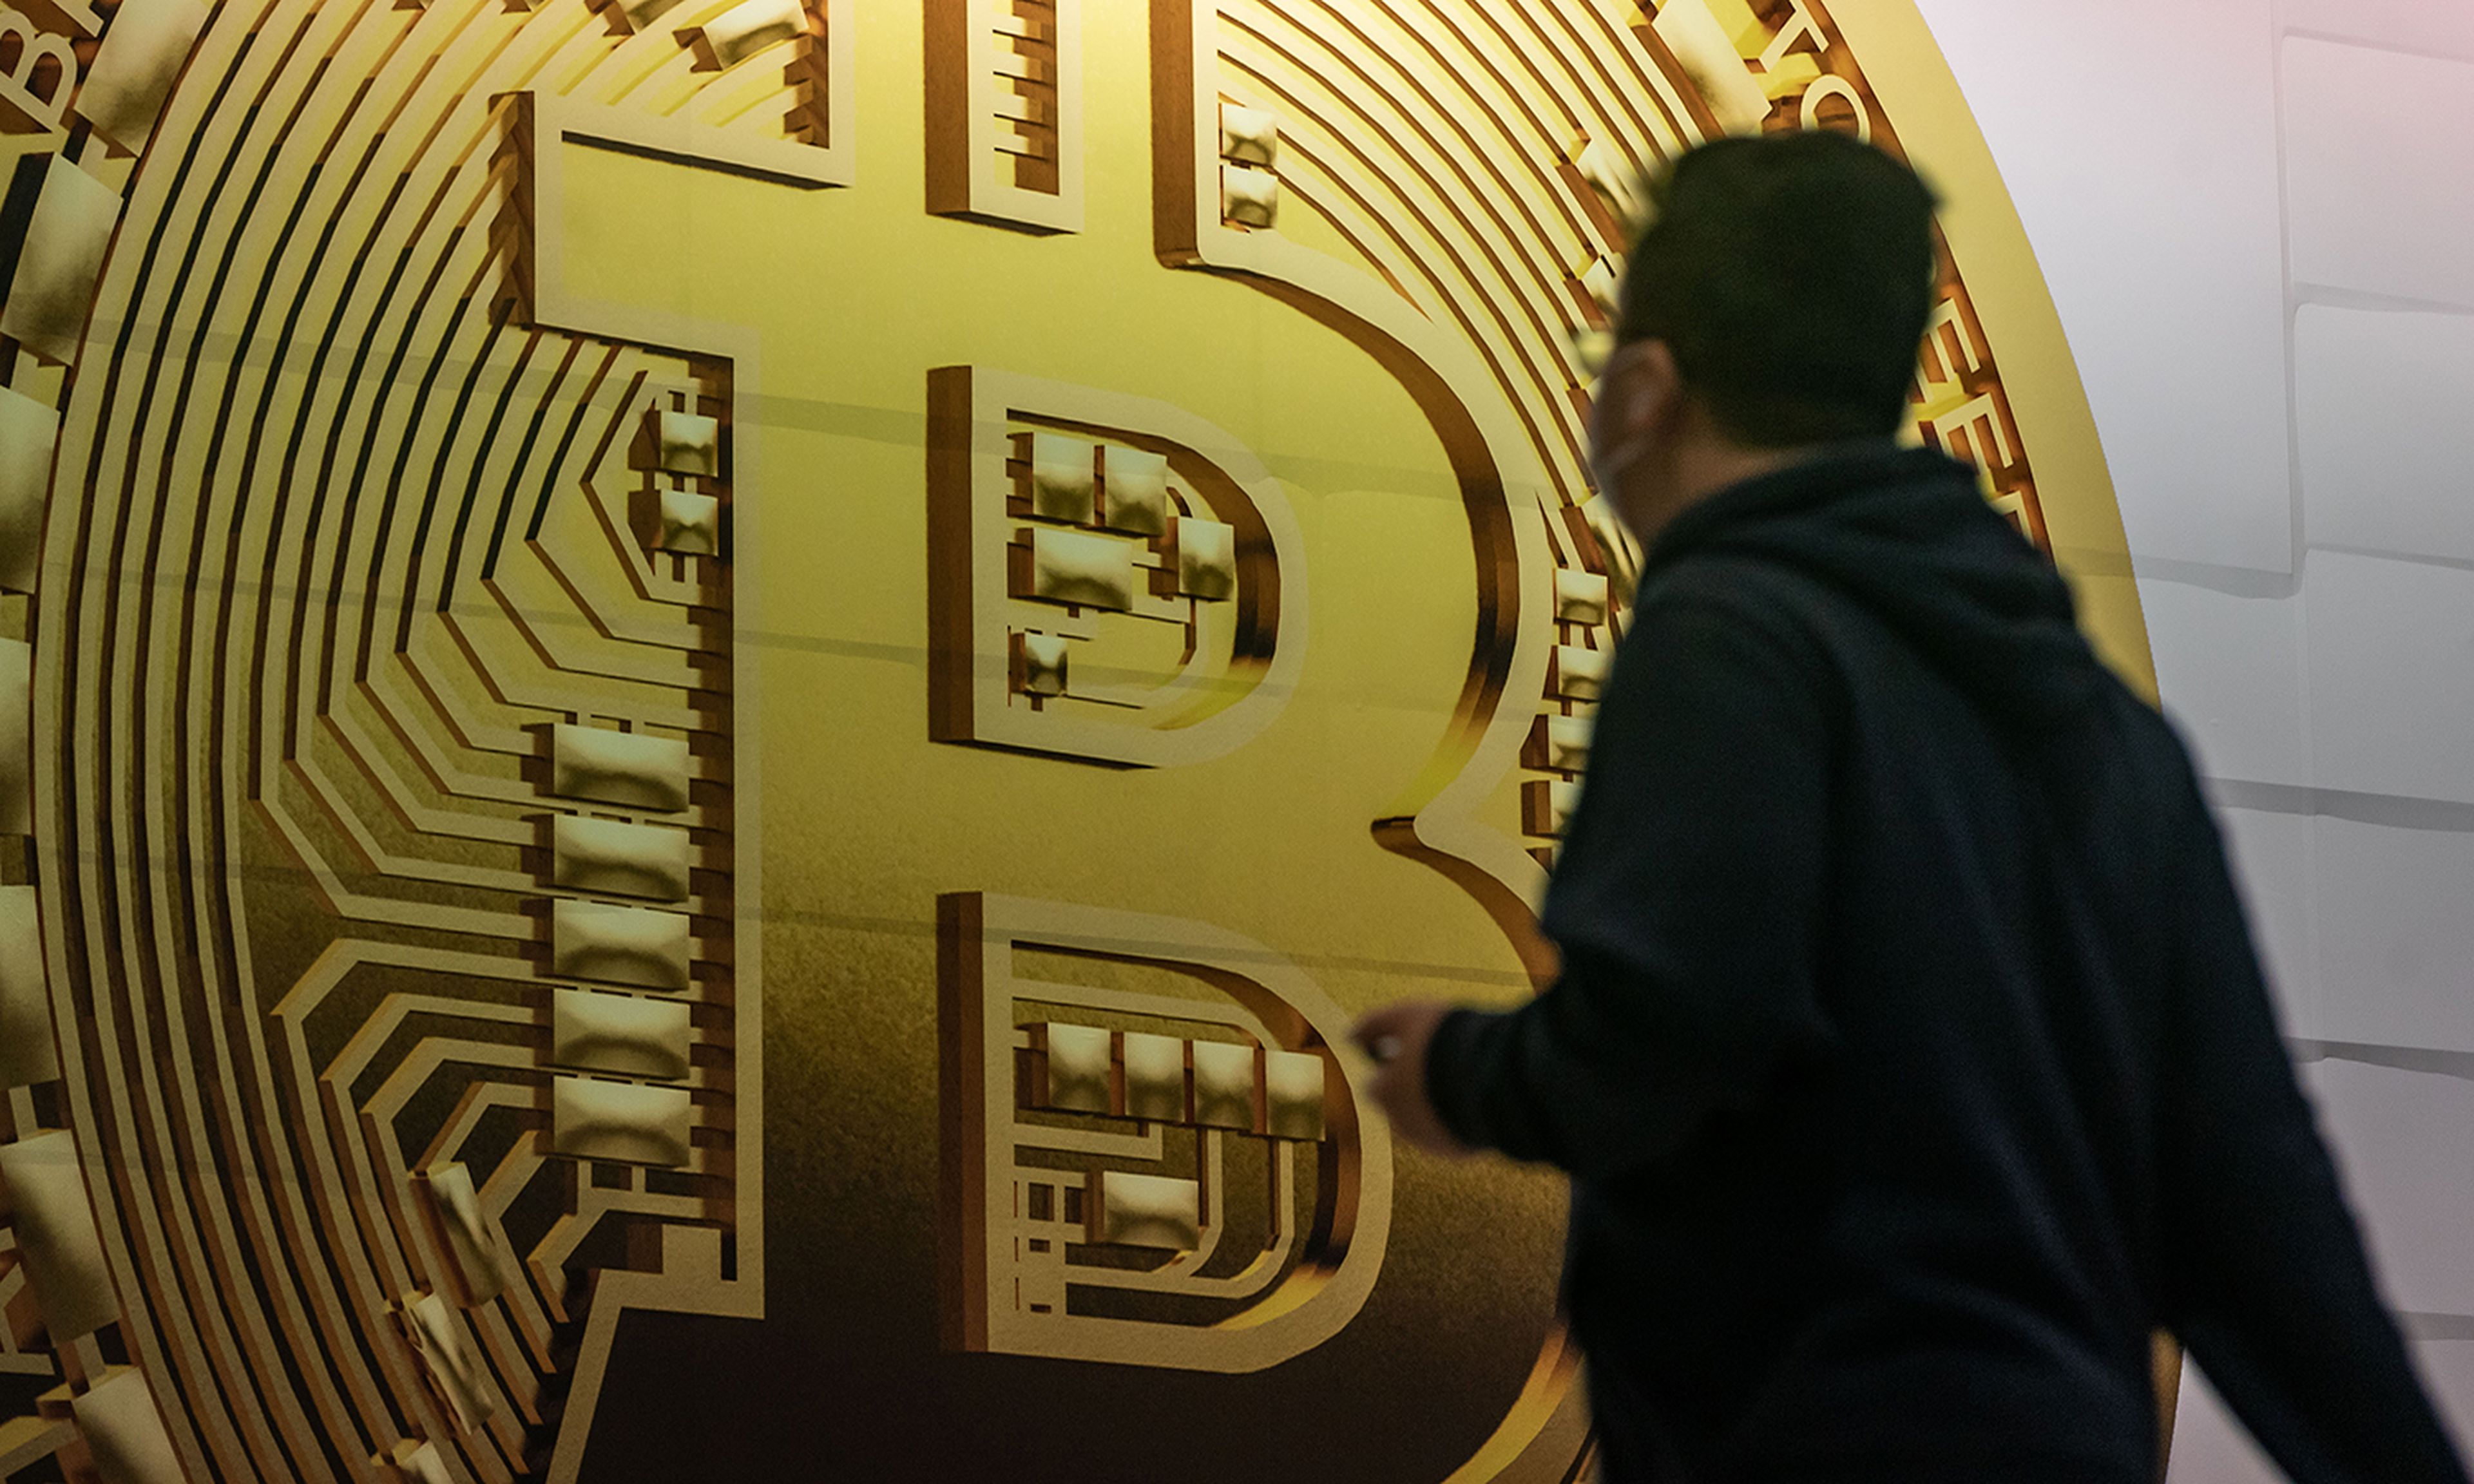 Pedestrians walk past an advertisement displaying a Bitcoin cryptocurrency token on Feb. 15, 2022, in Hong Kong. (Photo by Anthony Kwan/Getty Images)